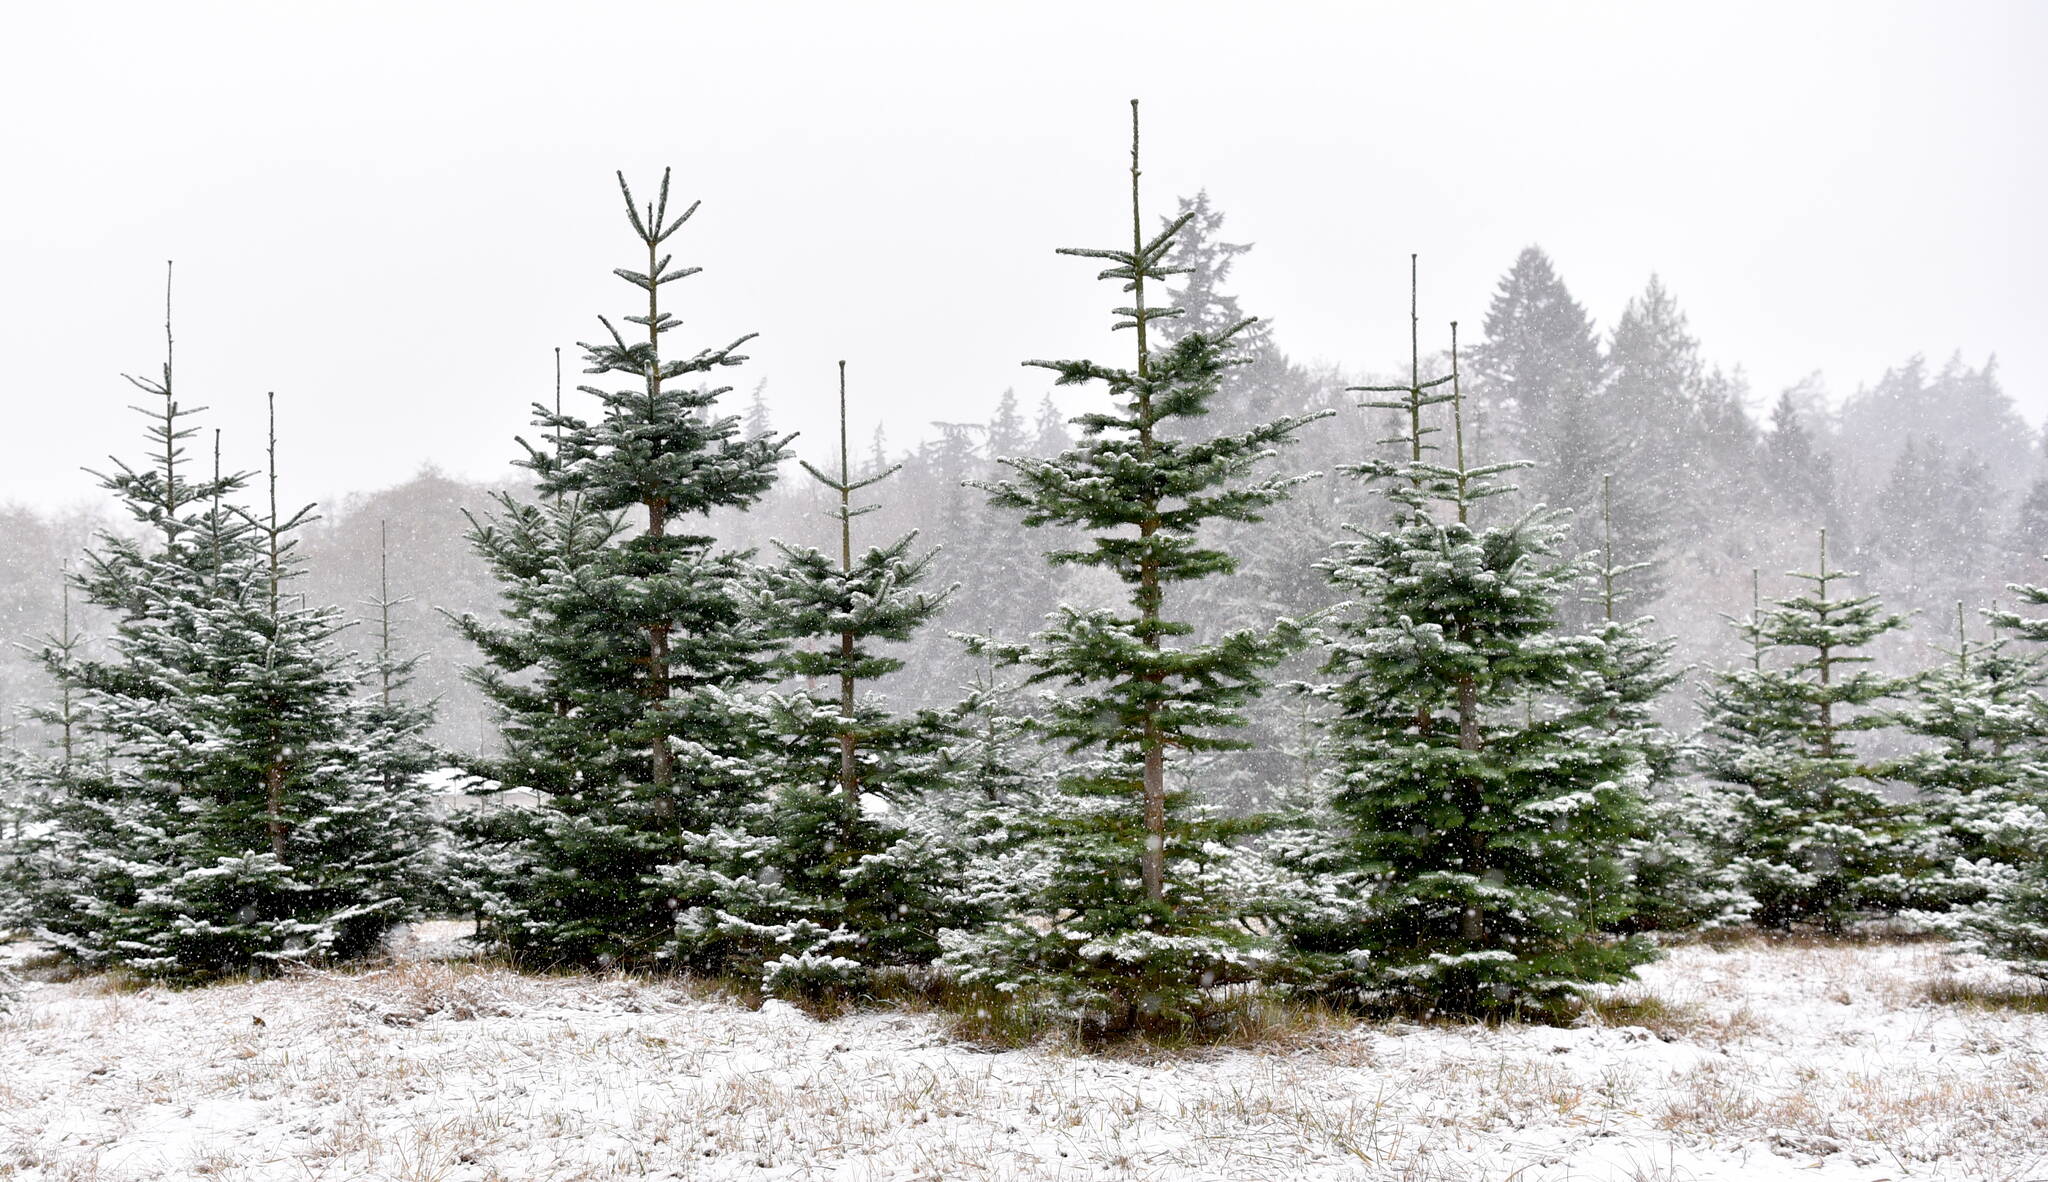 Christmas trees near the BARN stand tall in the snow.